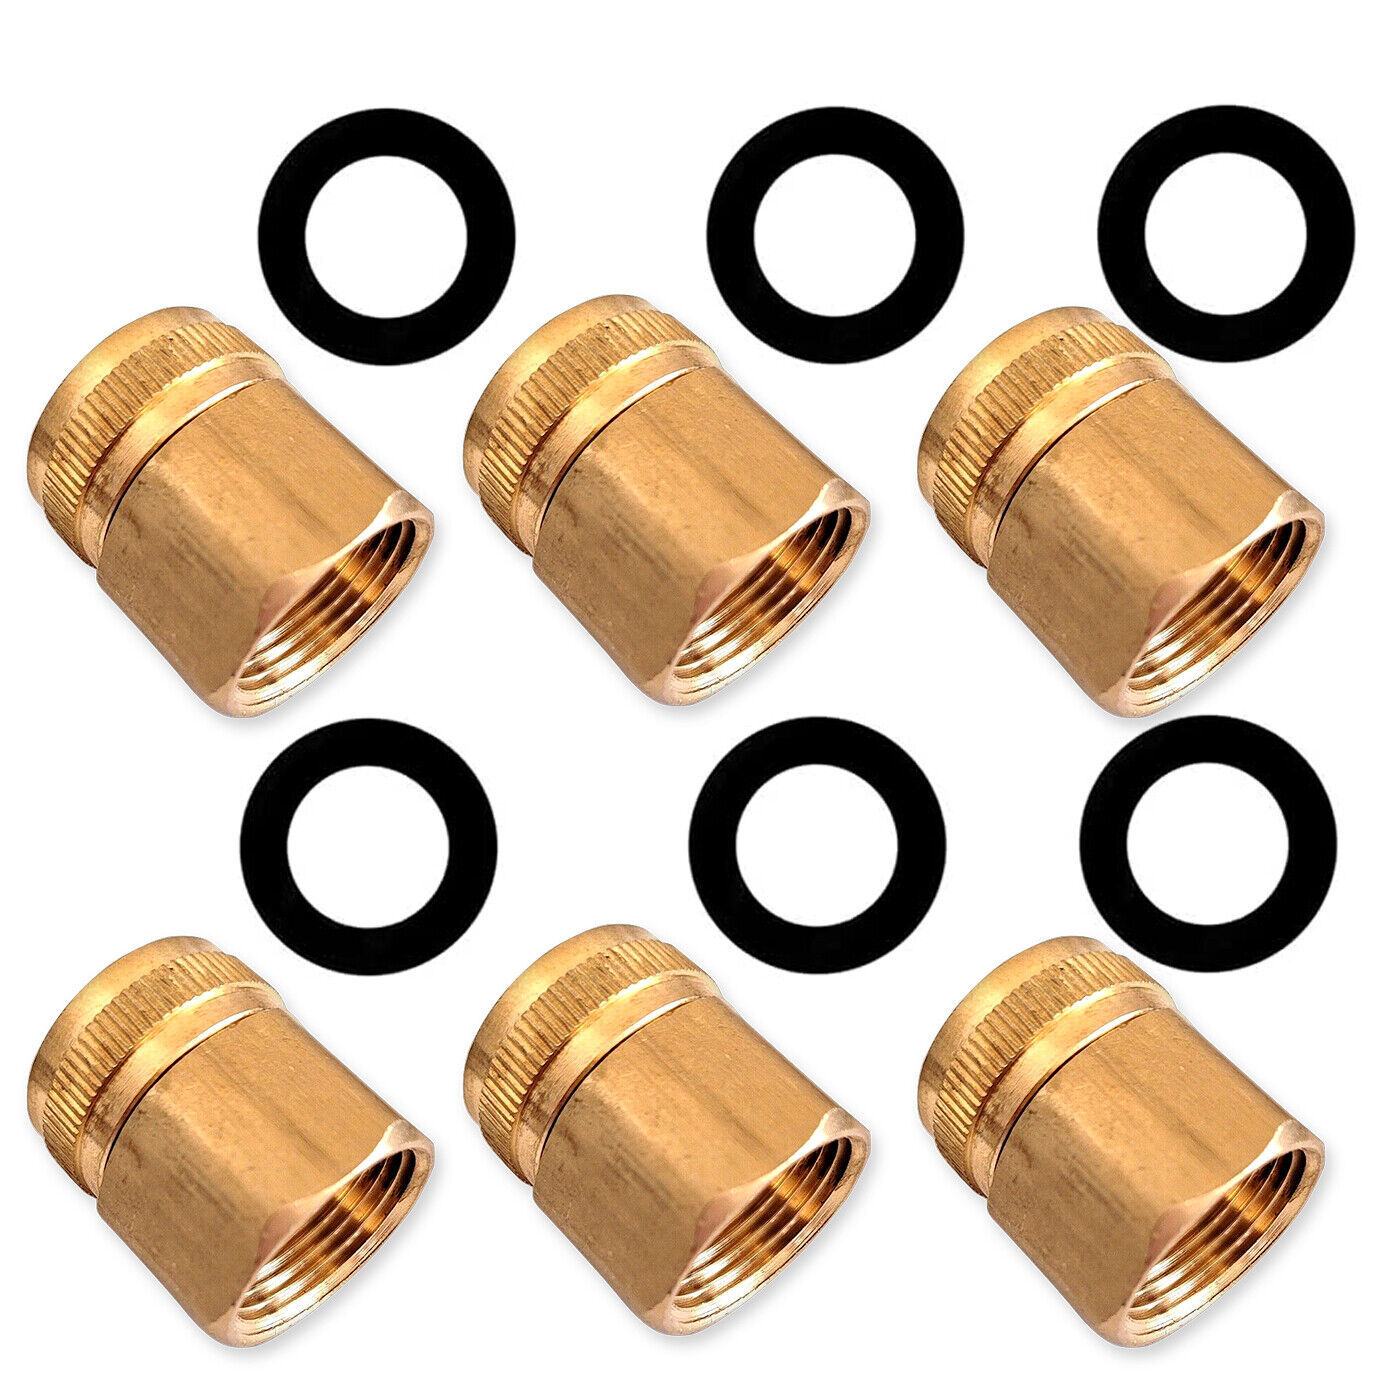 Primary image for Brass Garden Hose Adapter Connector 3/4" Female NPT to 3/4" Female GHT Thread US